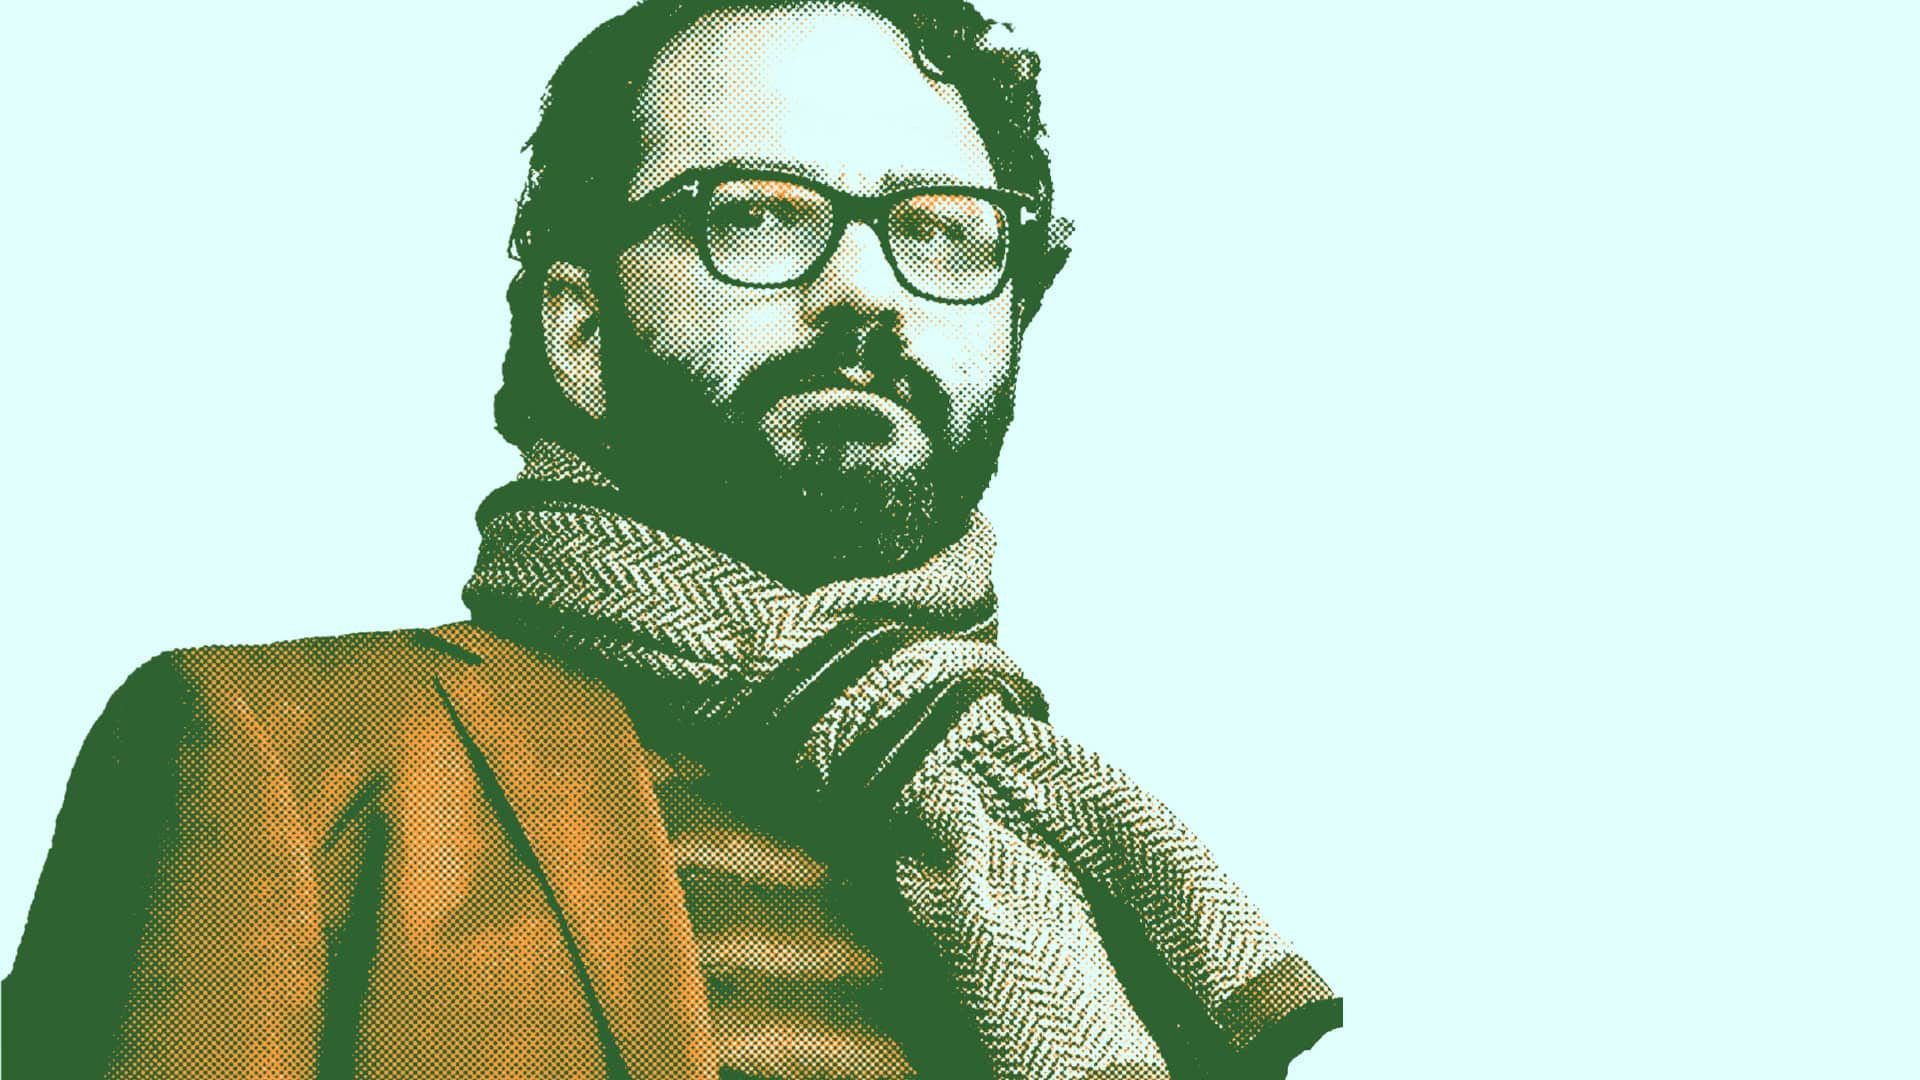 A halftone image of Victor Orta in his big scarf